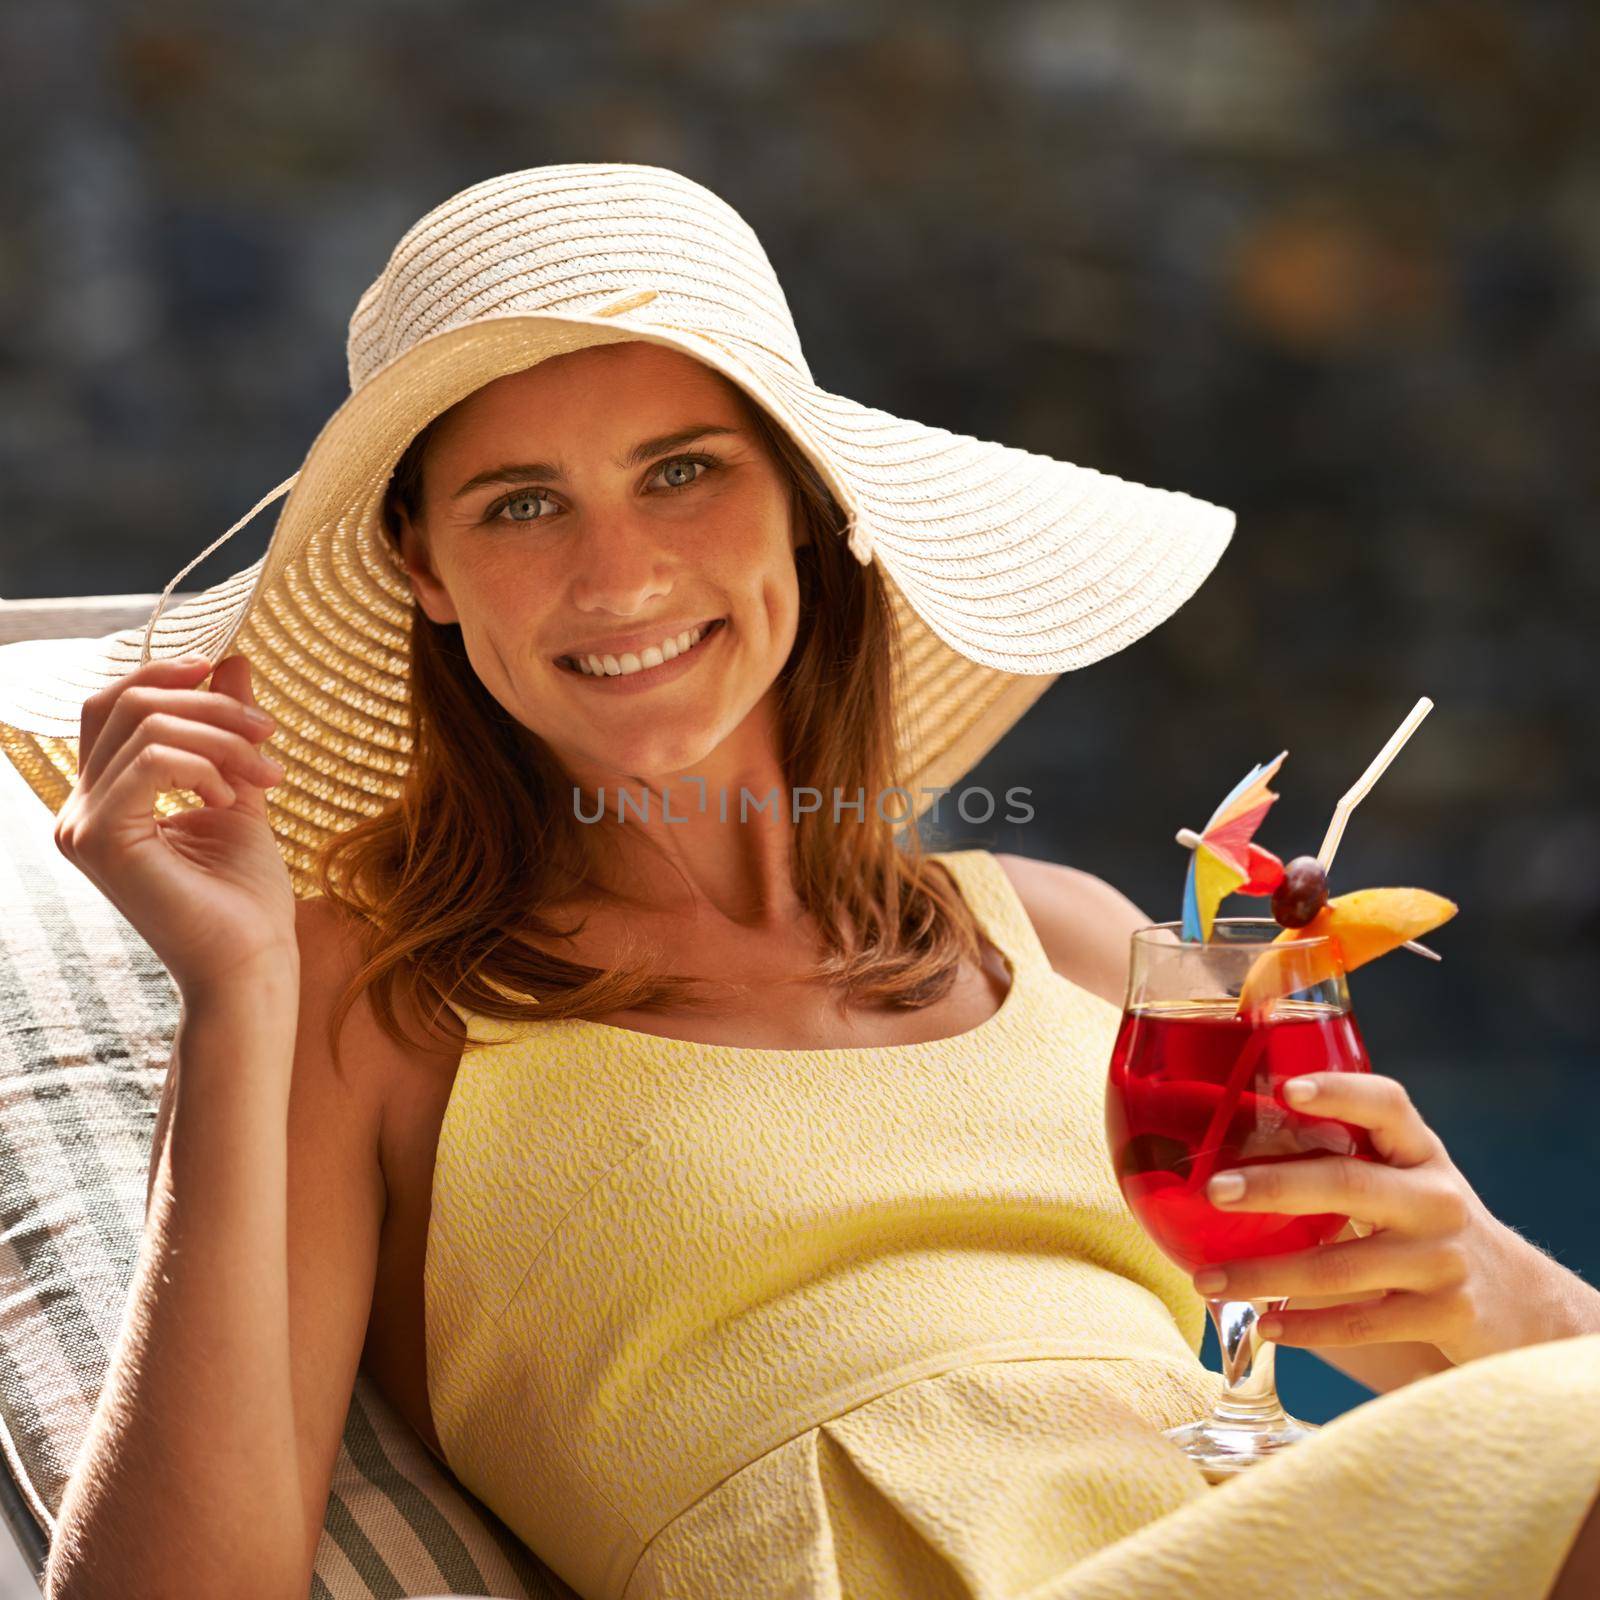 This is the life. A beautiful woman enjoying a drink and smiling outdoors